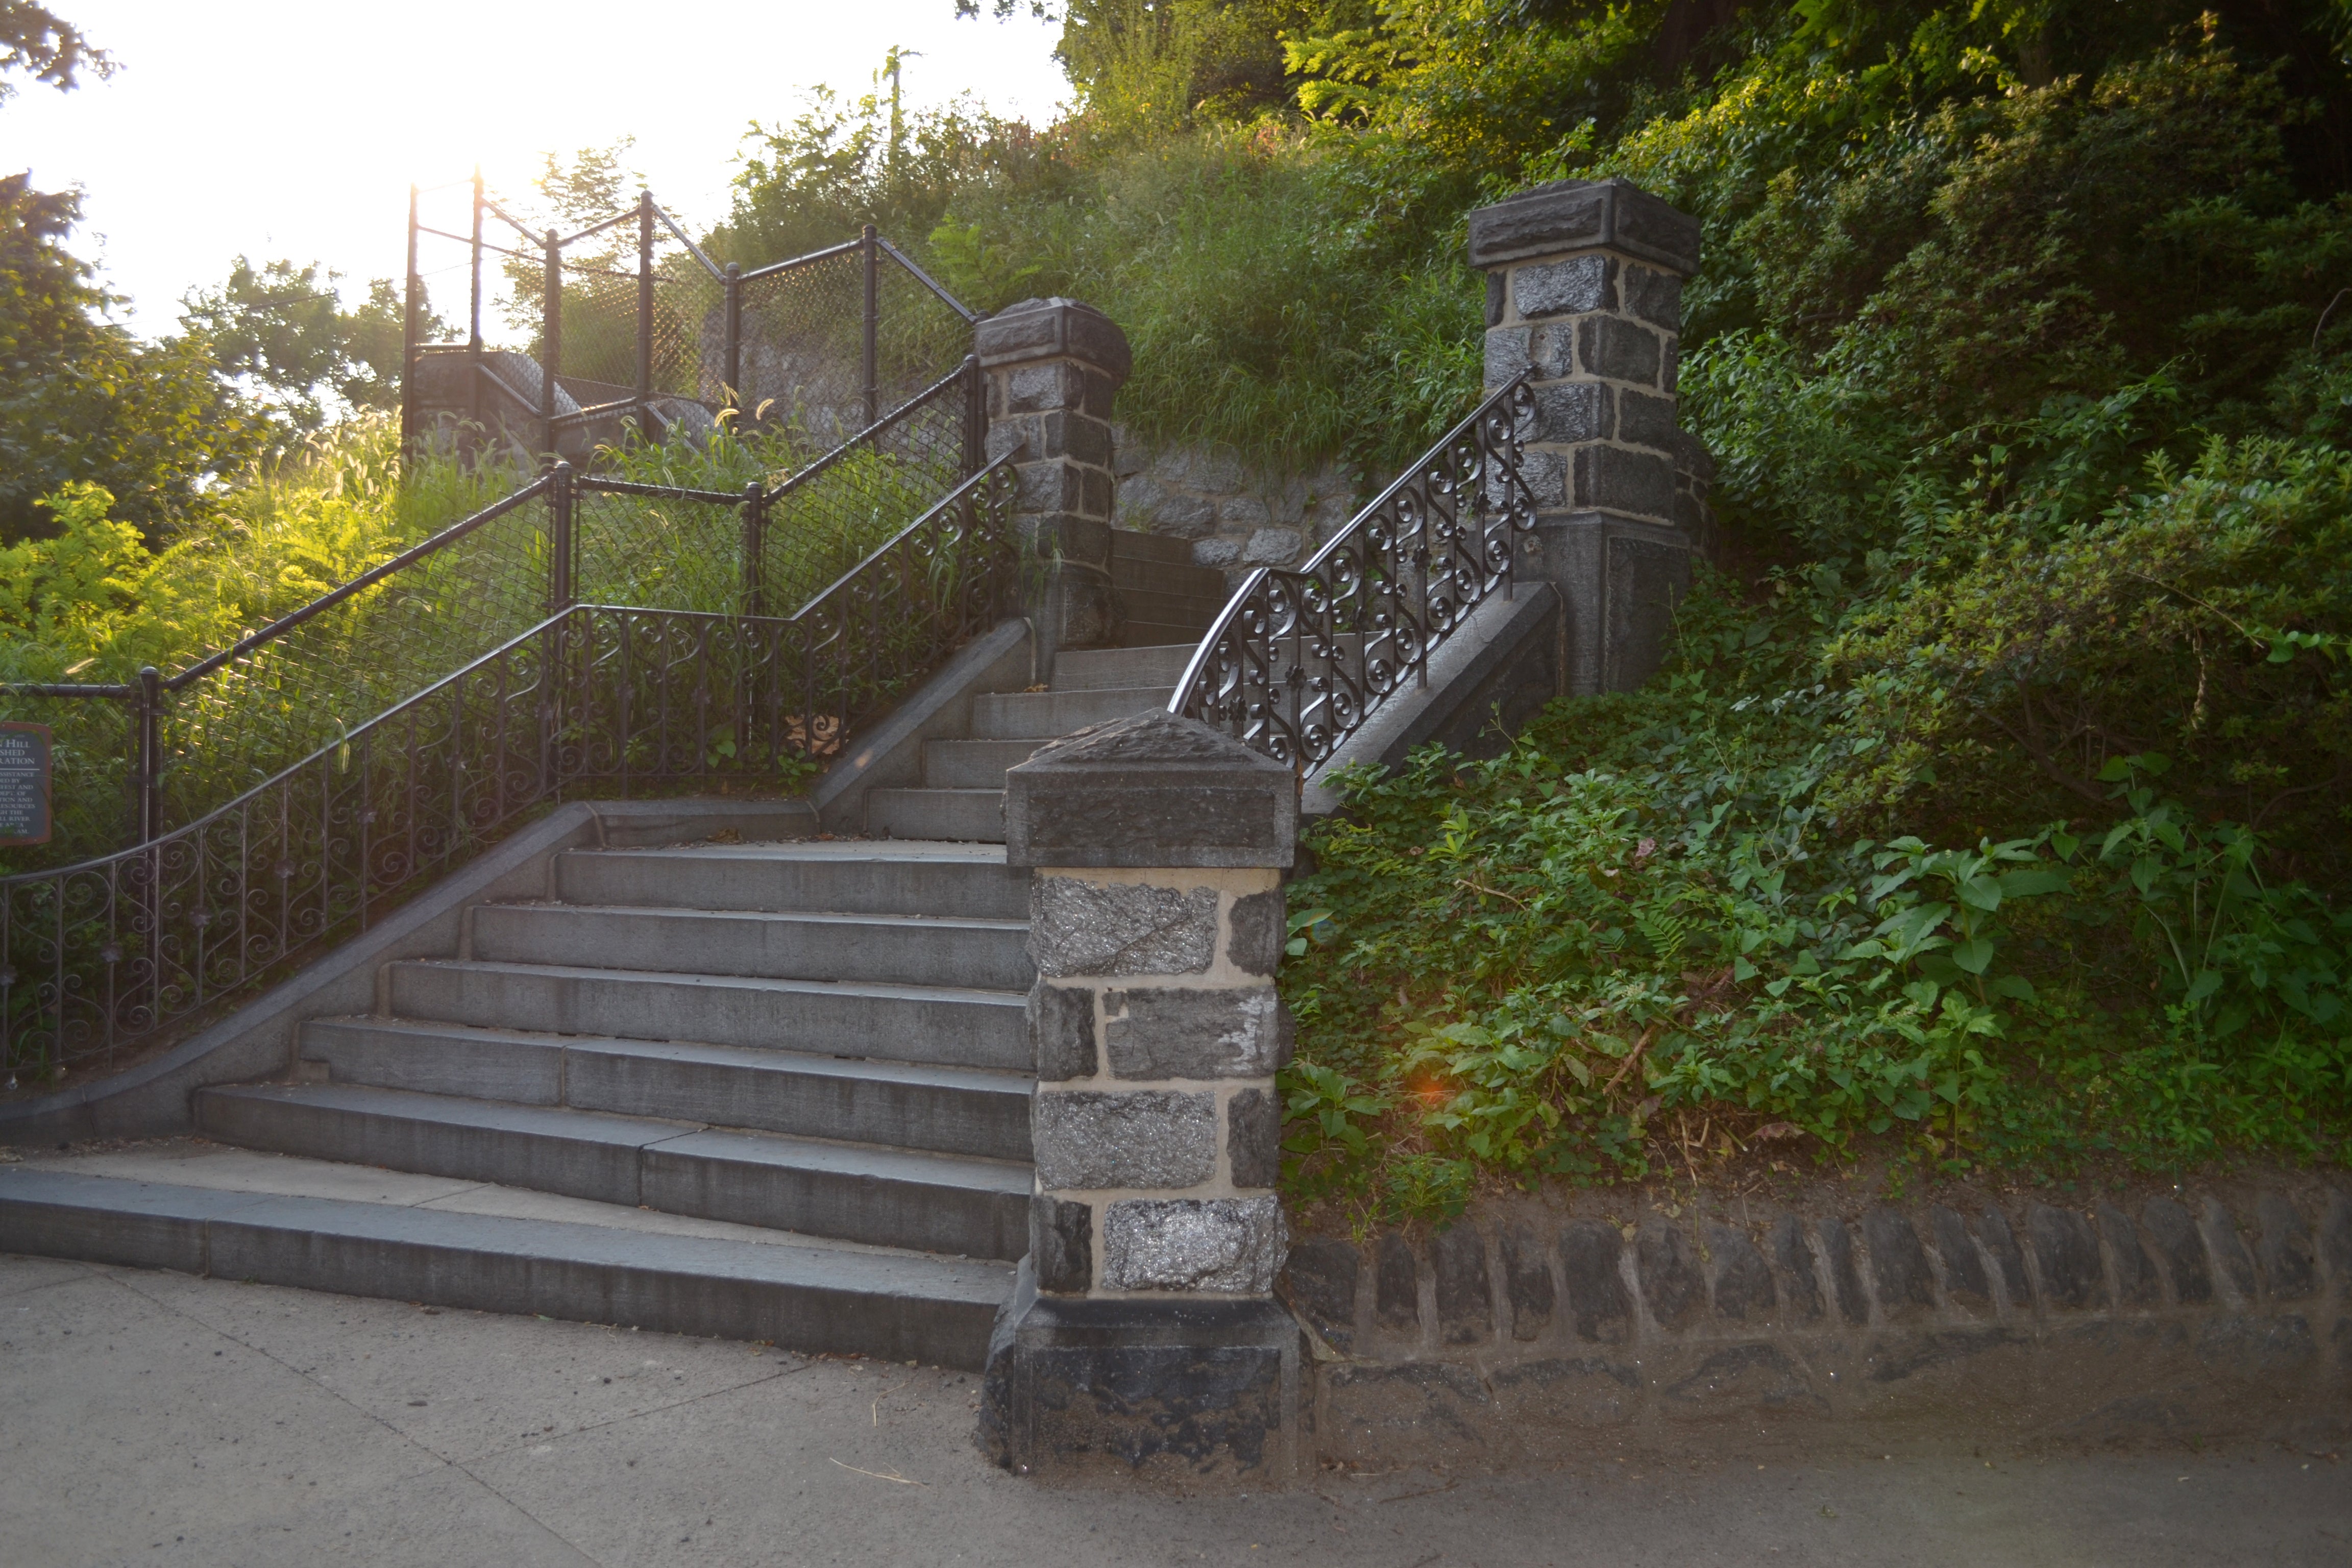 Granite steps lead up to Lemon Hill Mansion and the grassy fields surrounding it